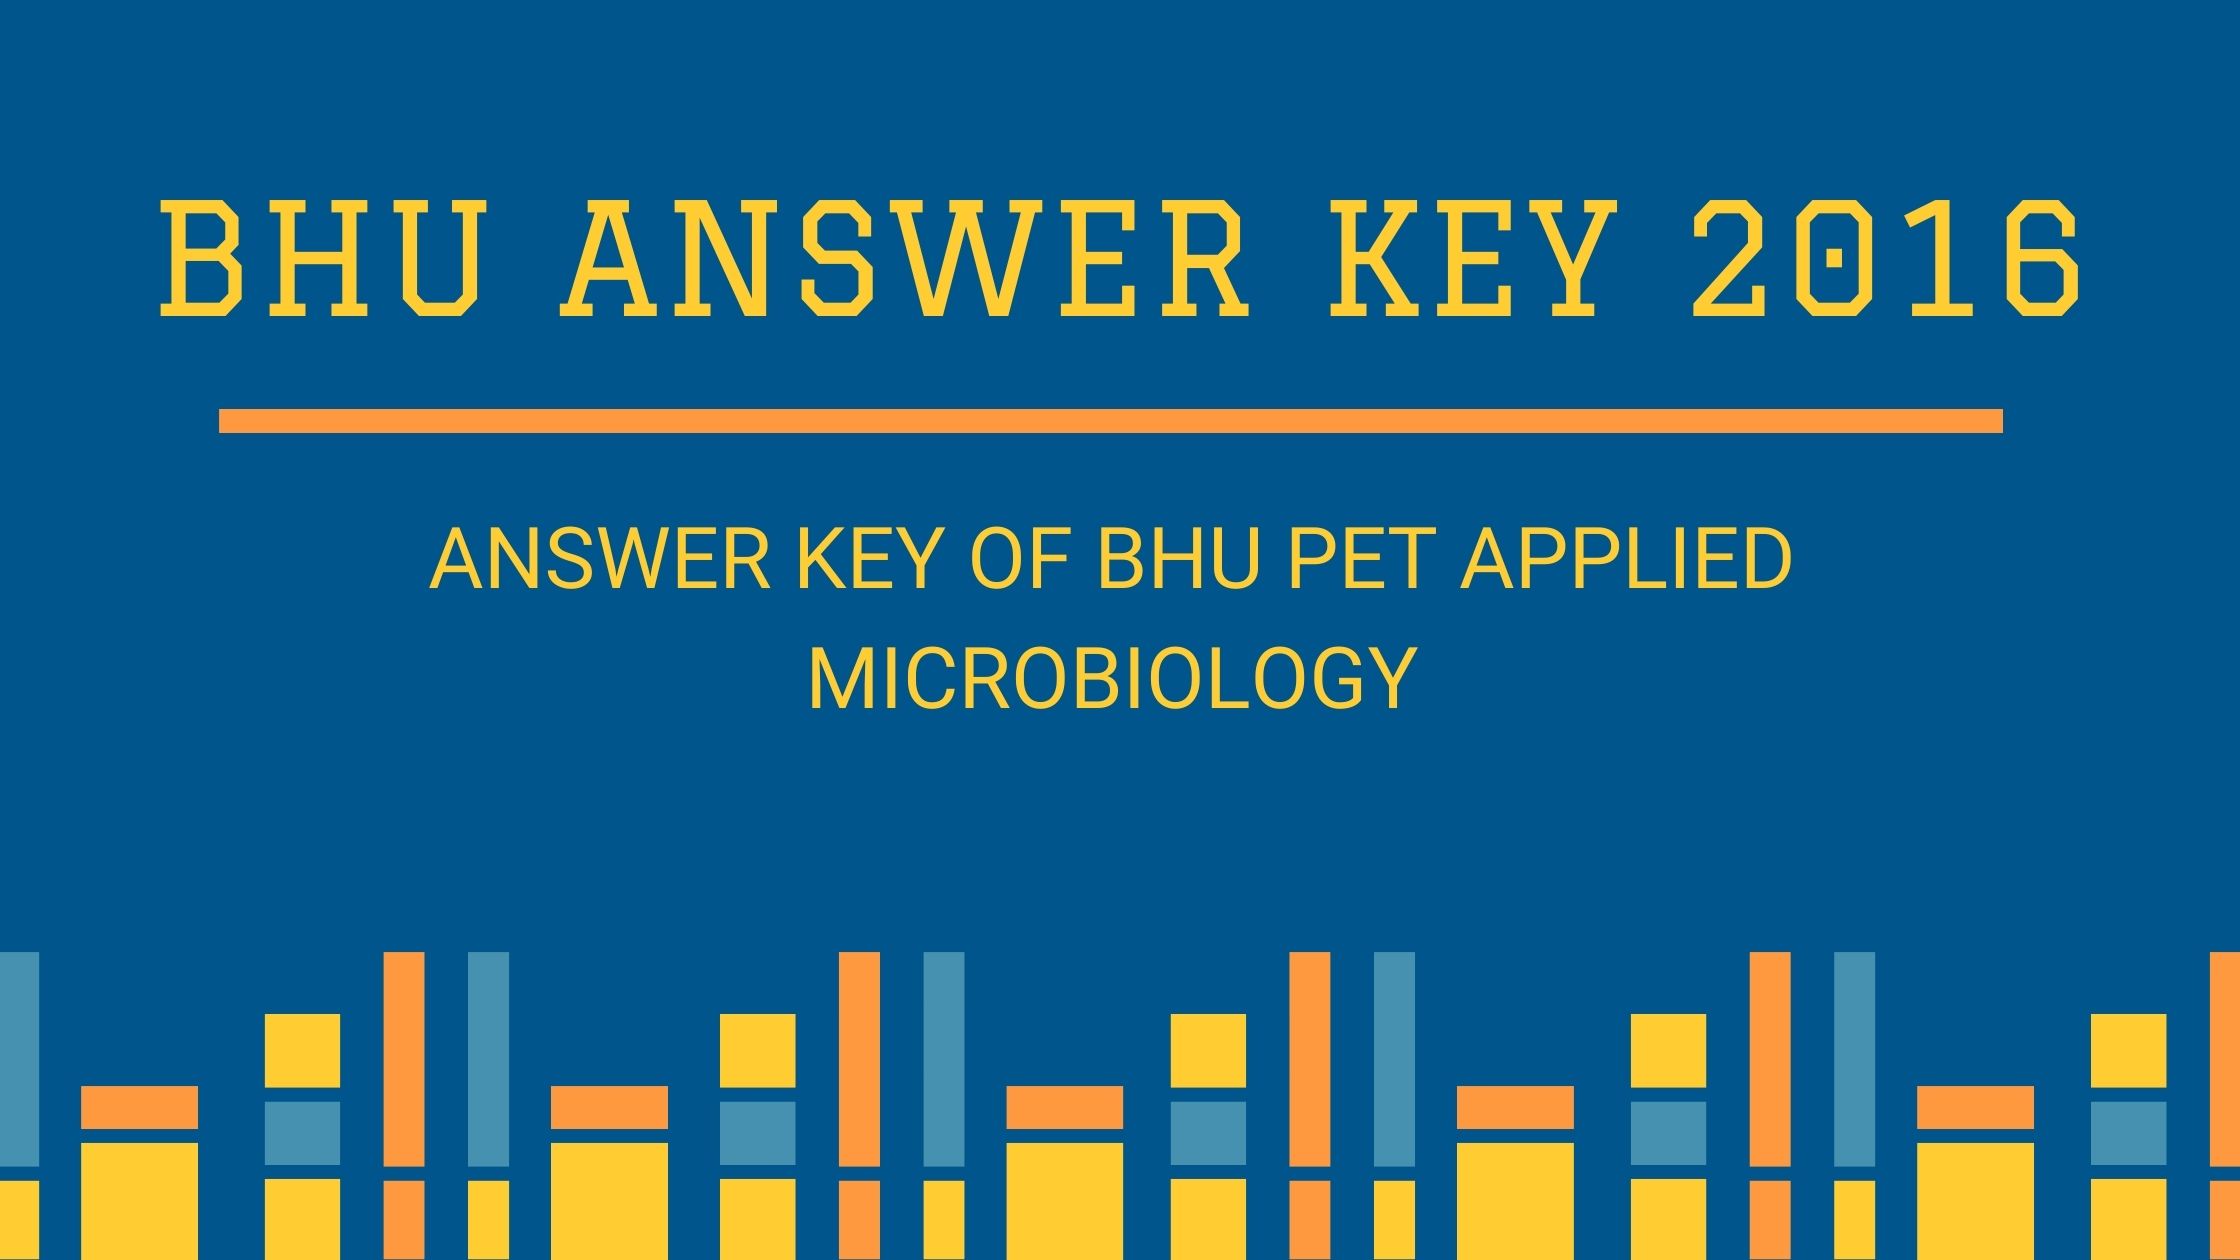 Answer Key of BHU PET Applied Microbiology 2015